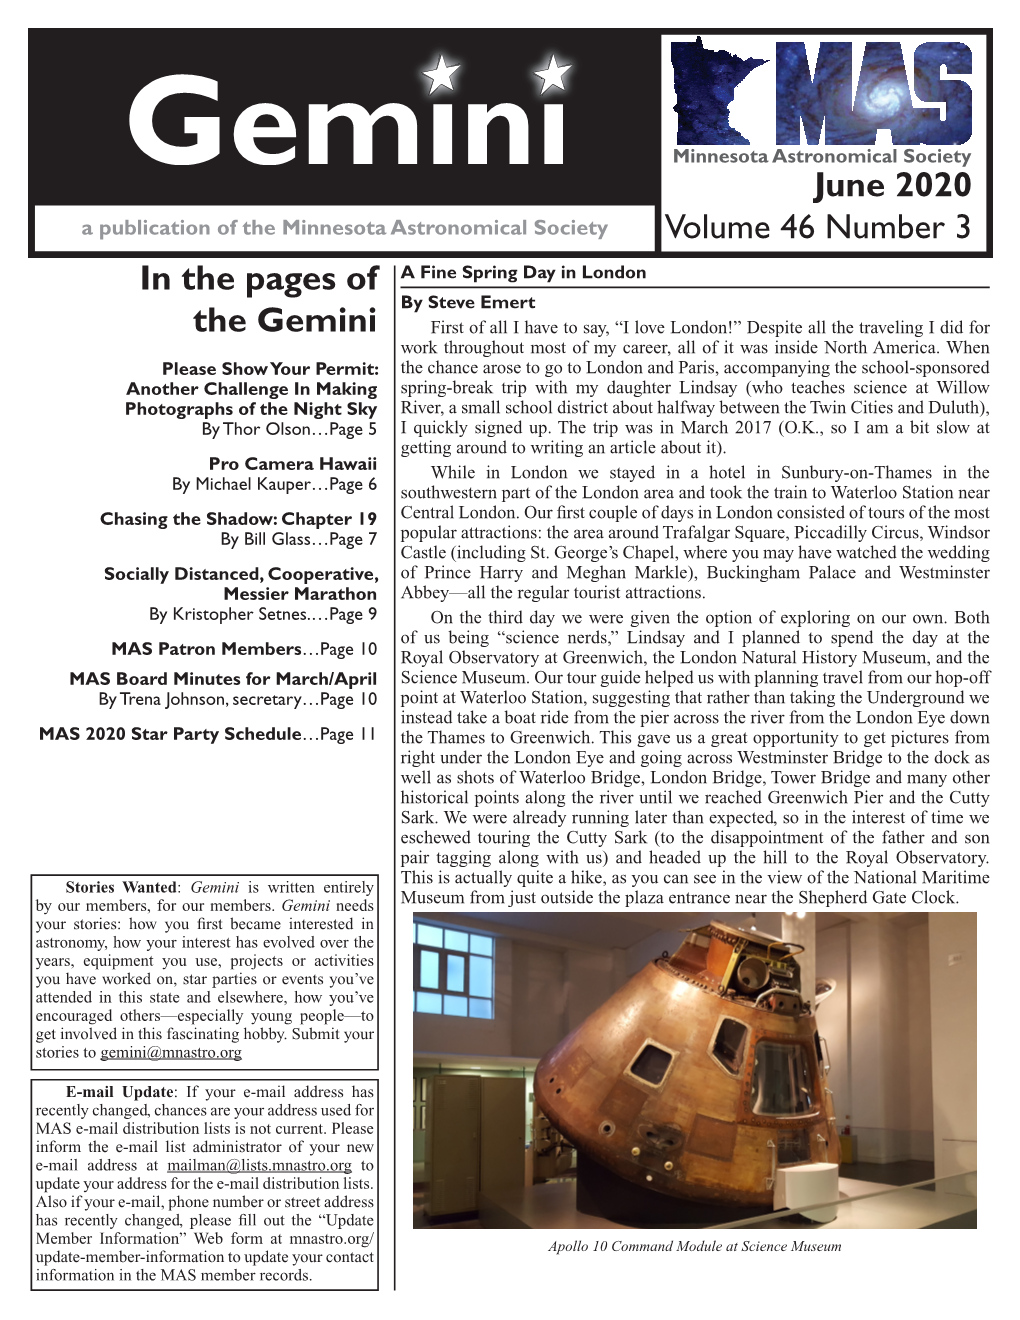 June 2020 Volume 46 Number 3 in the Pages of the Gemini